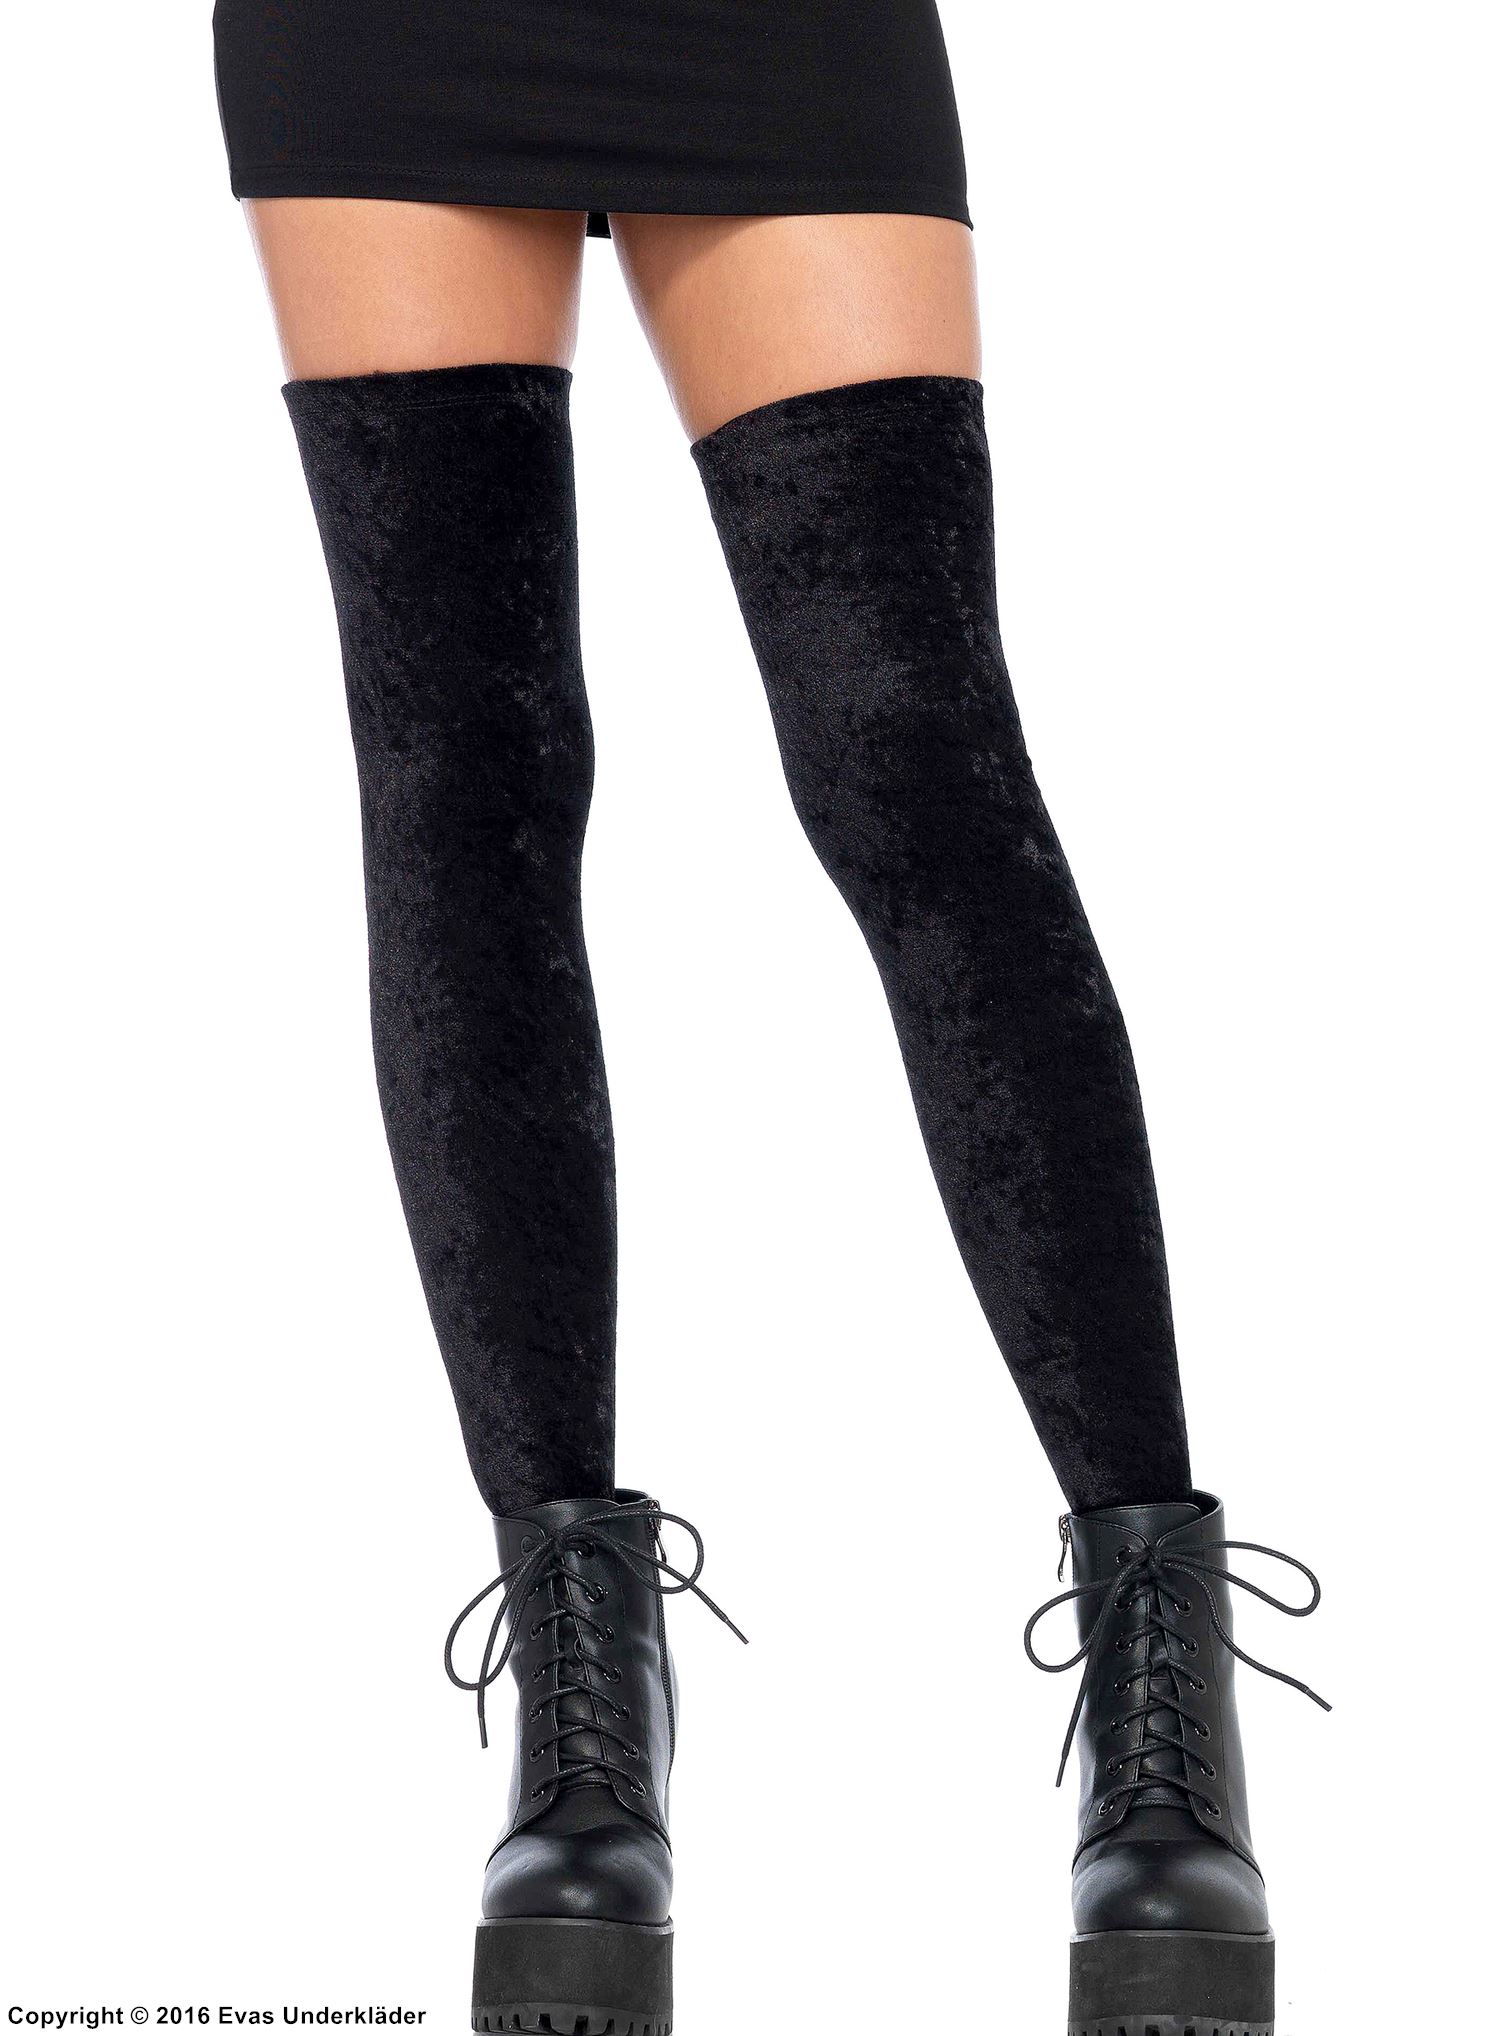 Thigh high stay-ups, velvet, without pattern